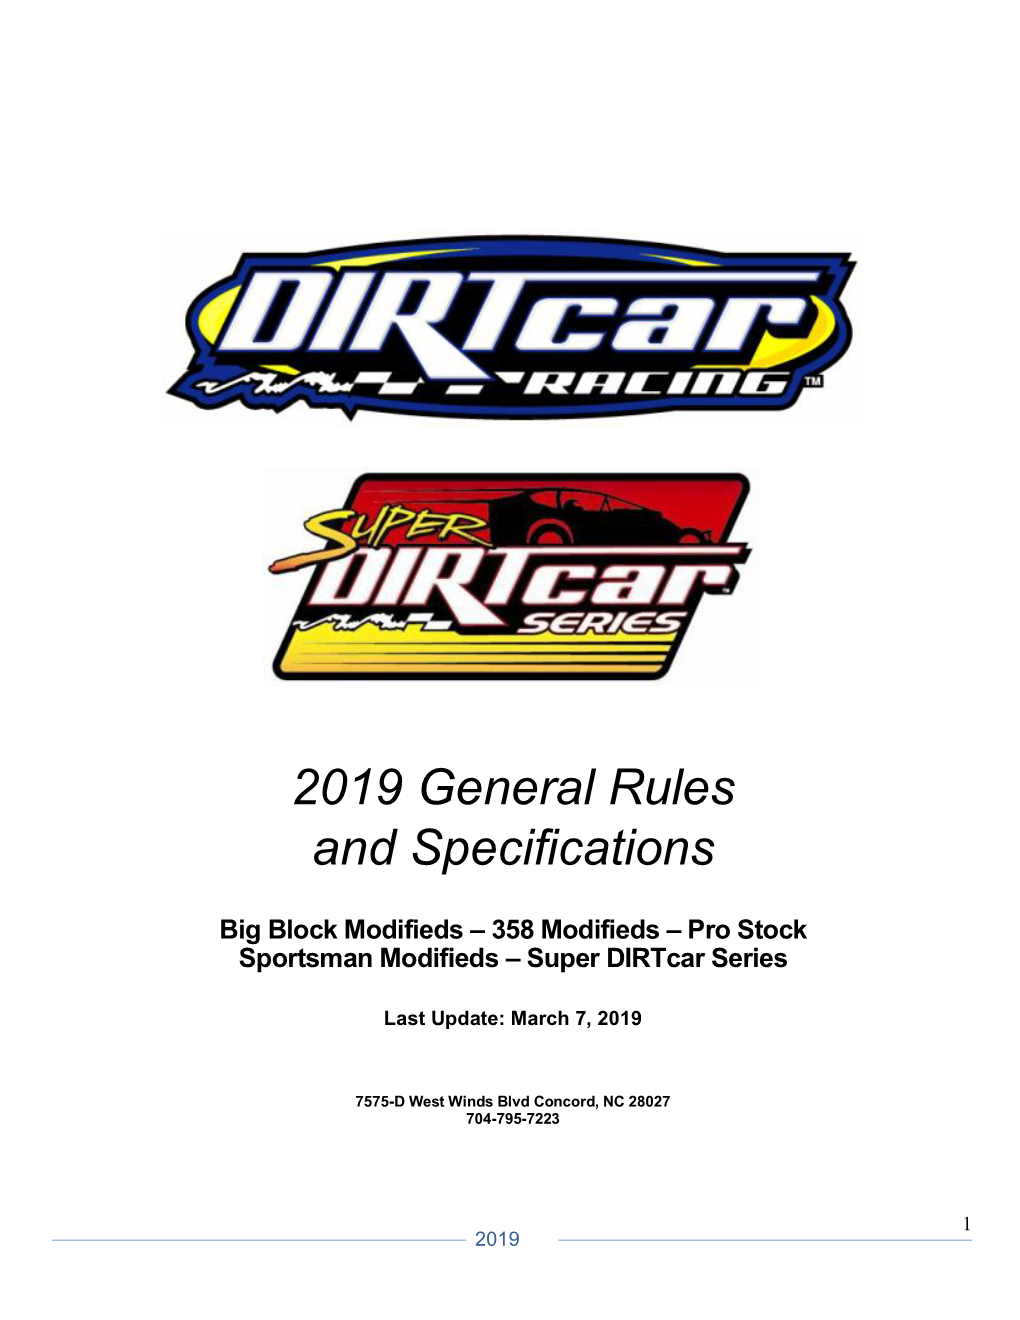 2019 General Rules and Specifications